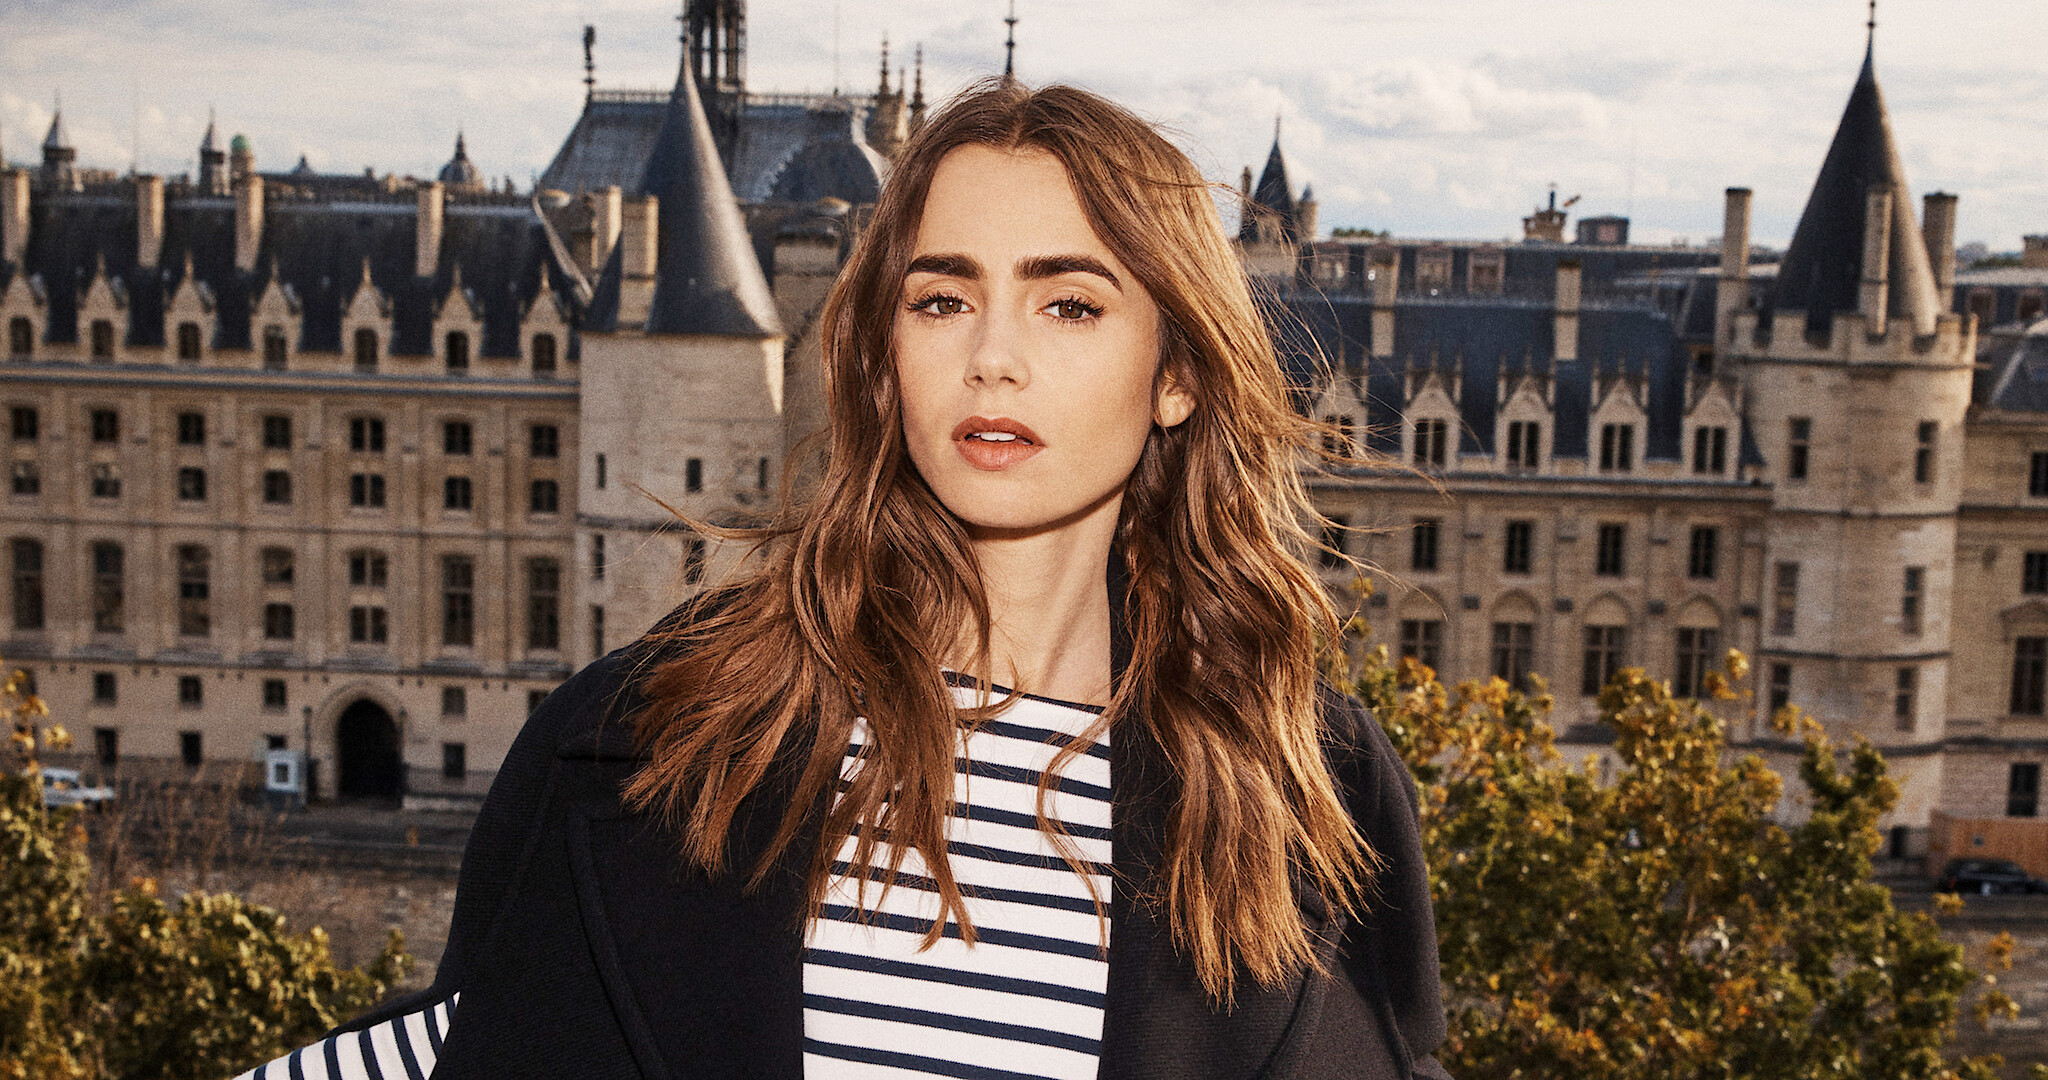 Emily in Paris' season 3 outfits: Lily Collins serves major fashion goals